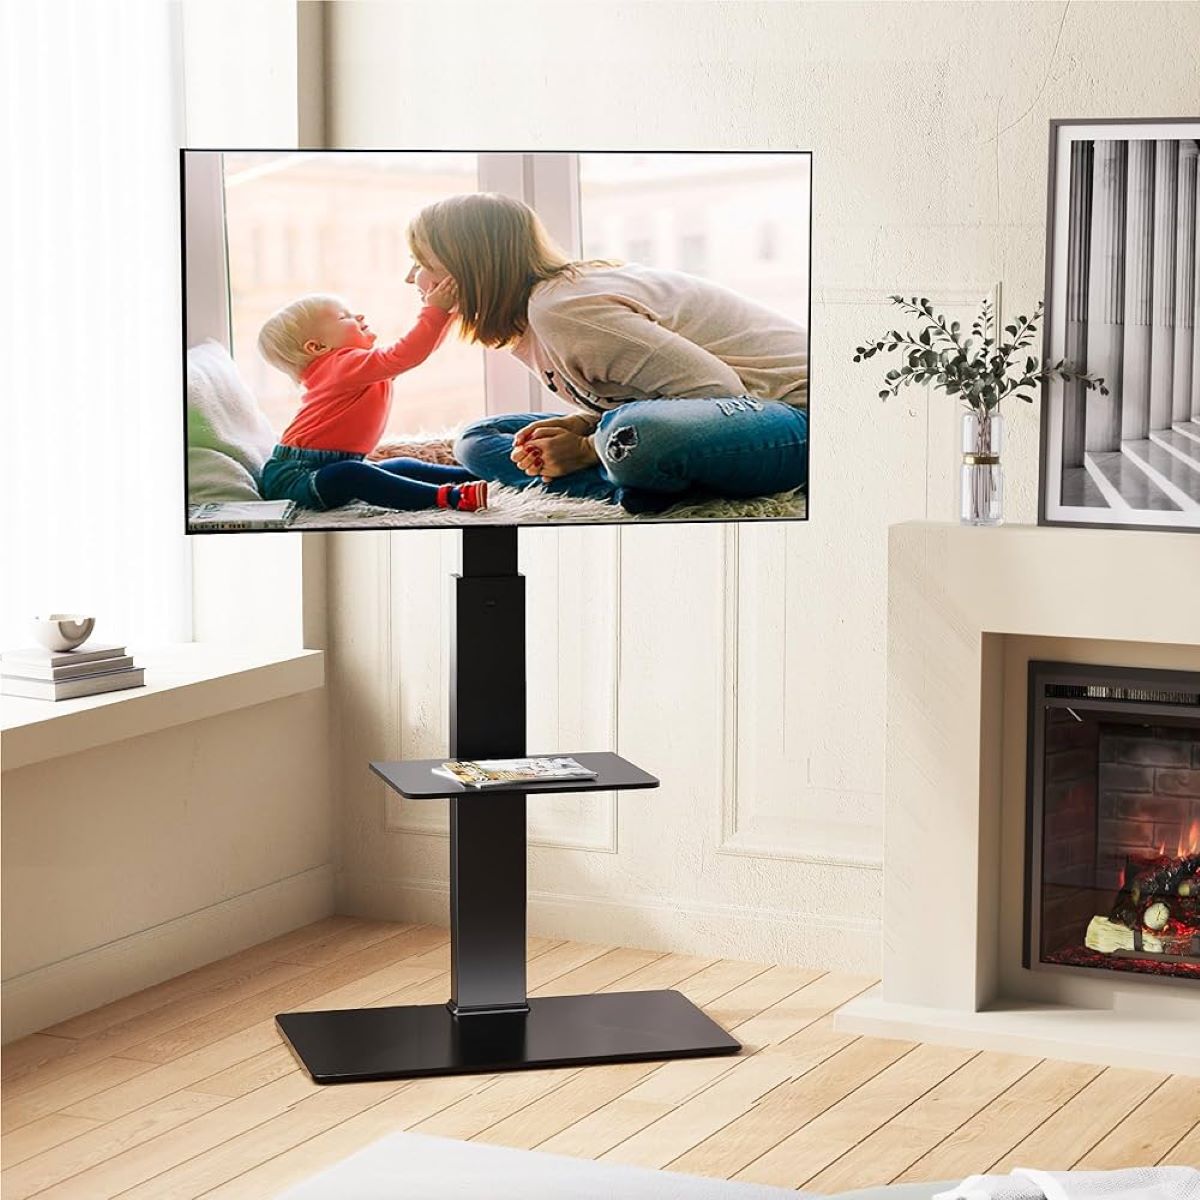 How To Make A TV Stand Higher